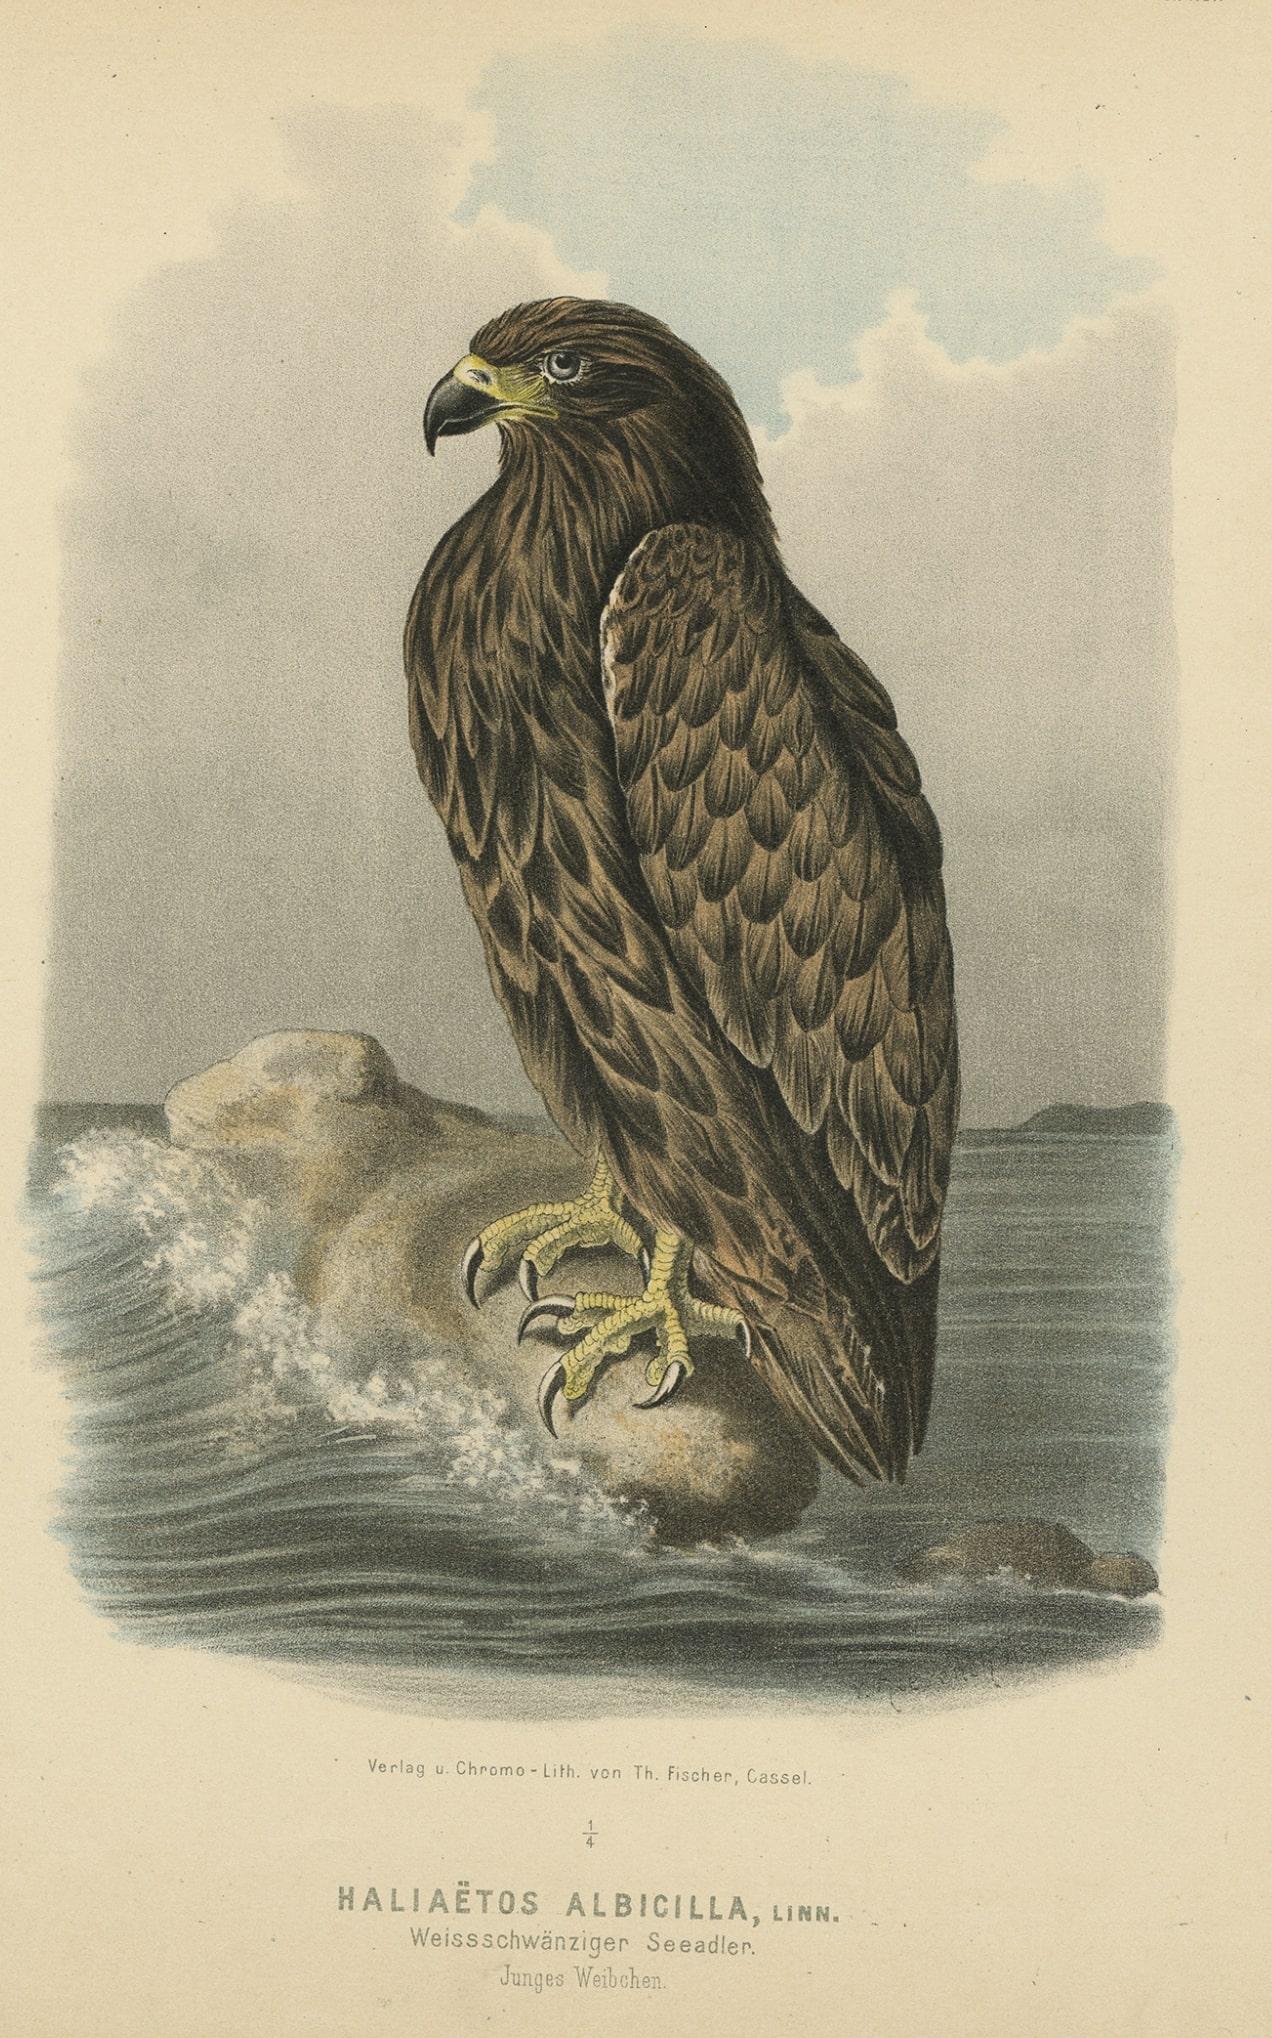 Antique print, titled: 'Taf. XLI. Haliaetos Albicilla. Weissschwanziger Seeadler, junges Weibchen.' 

This plate shows the white-tailed eagle (Haliaeetus albicilla), also known as the ern, erne, gray eagle, Eurasian sea eagle and white-tailed